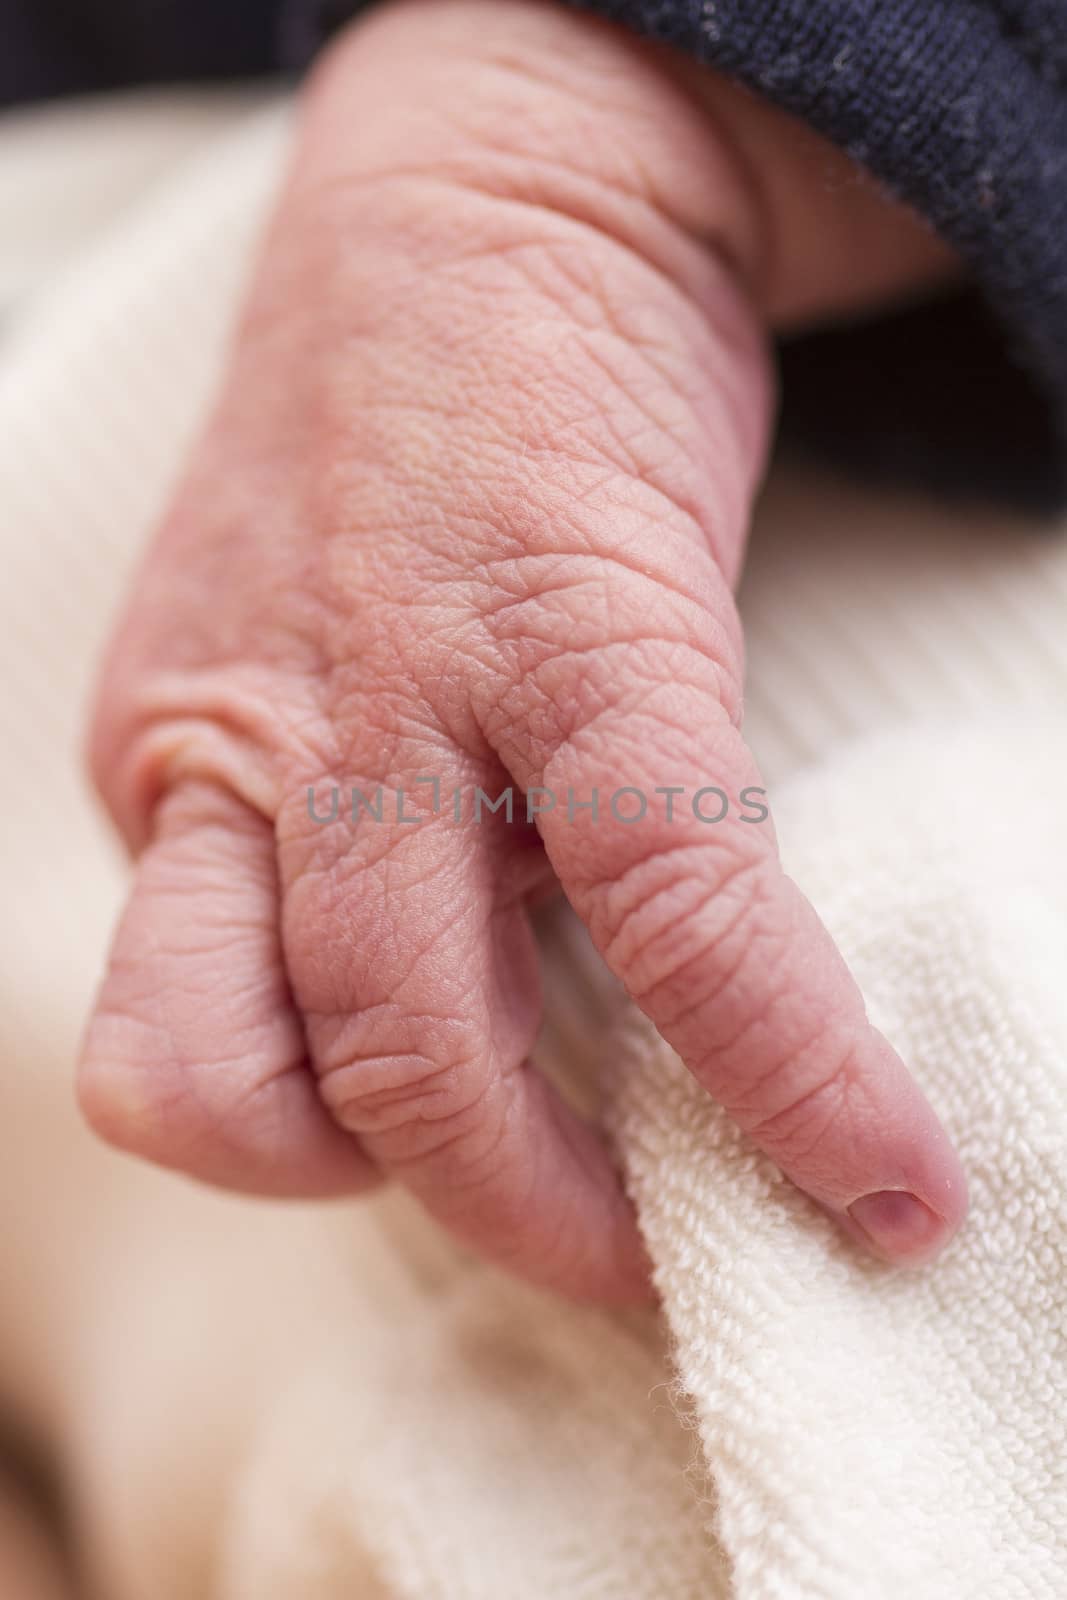 hand of new born baby in close up. vertical image